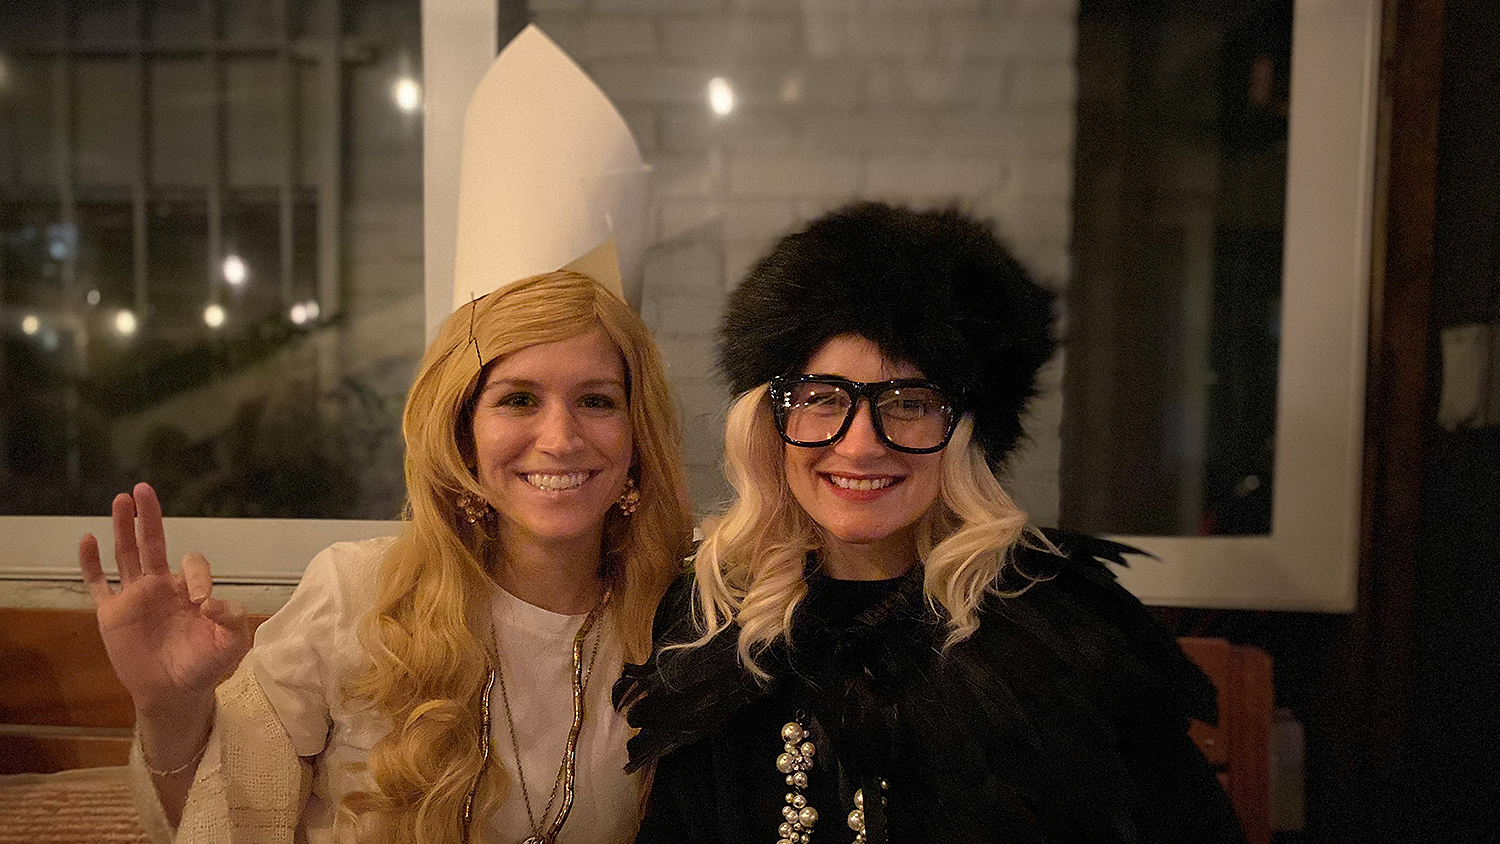 Two women smiling in costumes